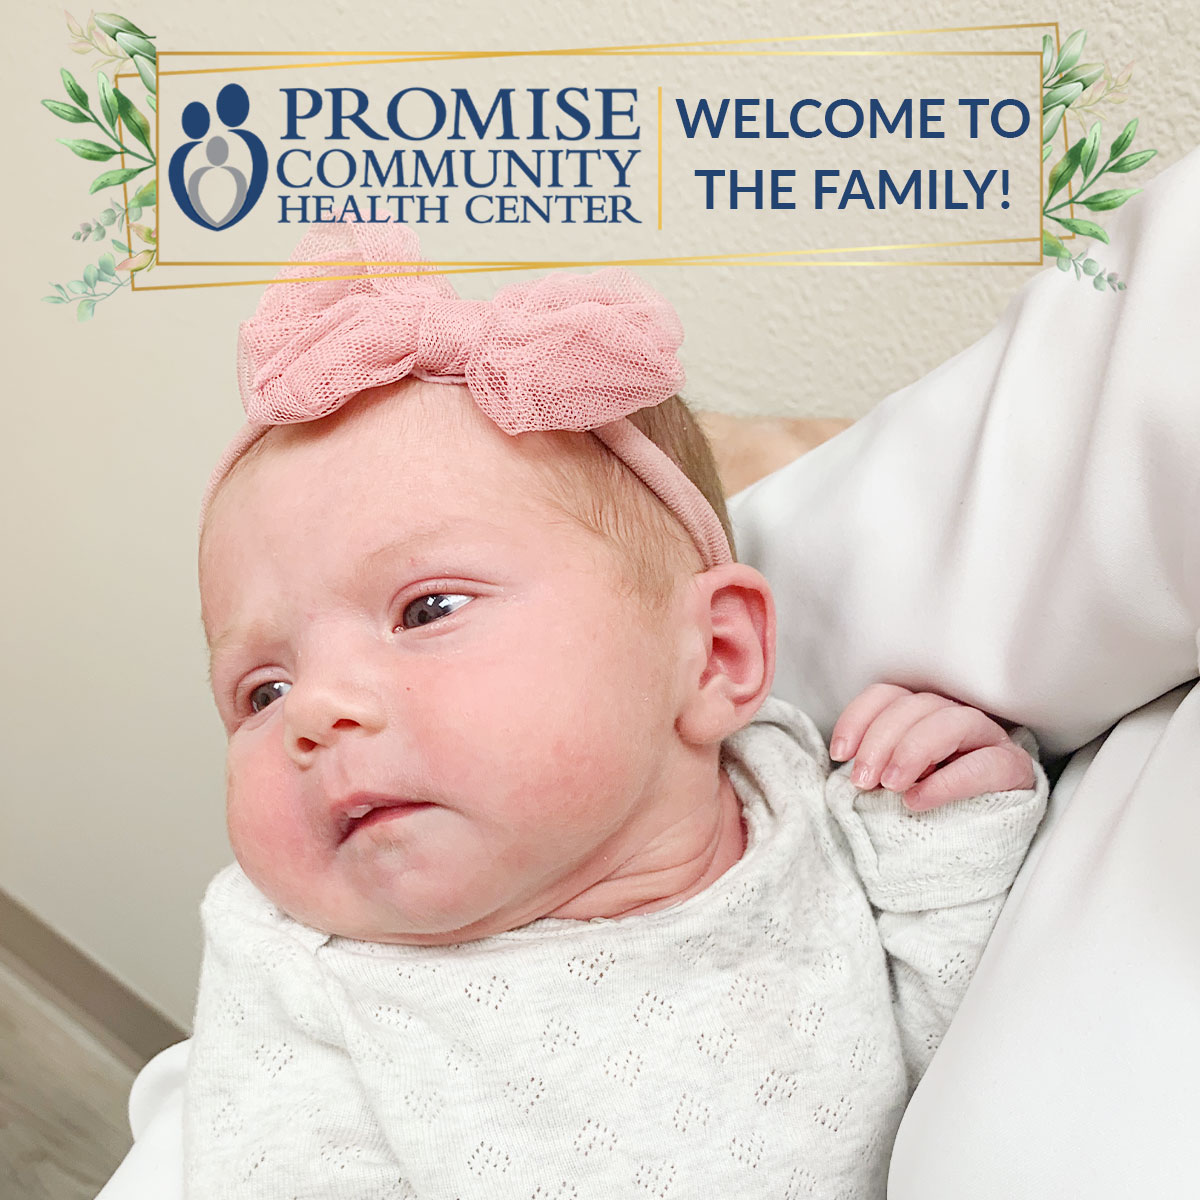 Home birth in Sioux Center, Iowa | Promise Community Health Center in Sioux Center, Iowa | Home births in northwest Iowa, Home births in southeast South Dakota, Home births in southwest Minnesota | Home births in Sioux Falls South Dakota, Home births in Beresford South Dakota, Home births in Sioux City IA, Home births in LeMars IA, Home births in Worthington MN, Home births in Iowa, Home births in South Dakota, Home births in Minnesota